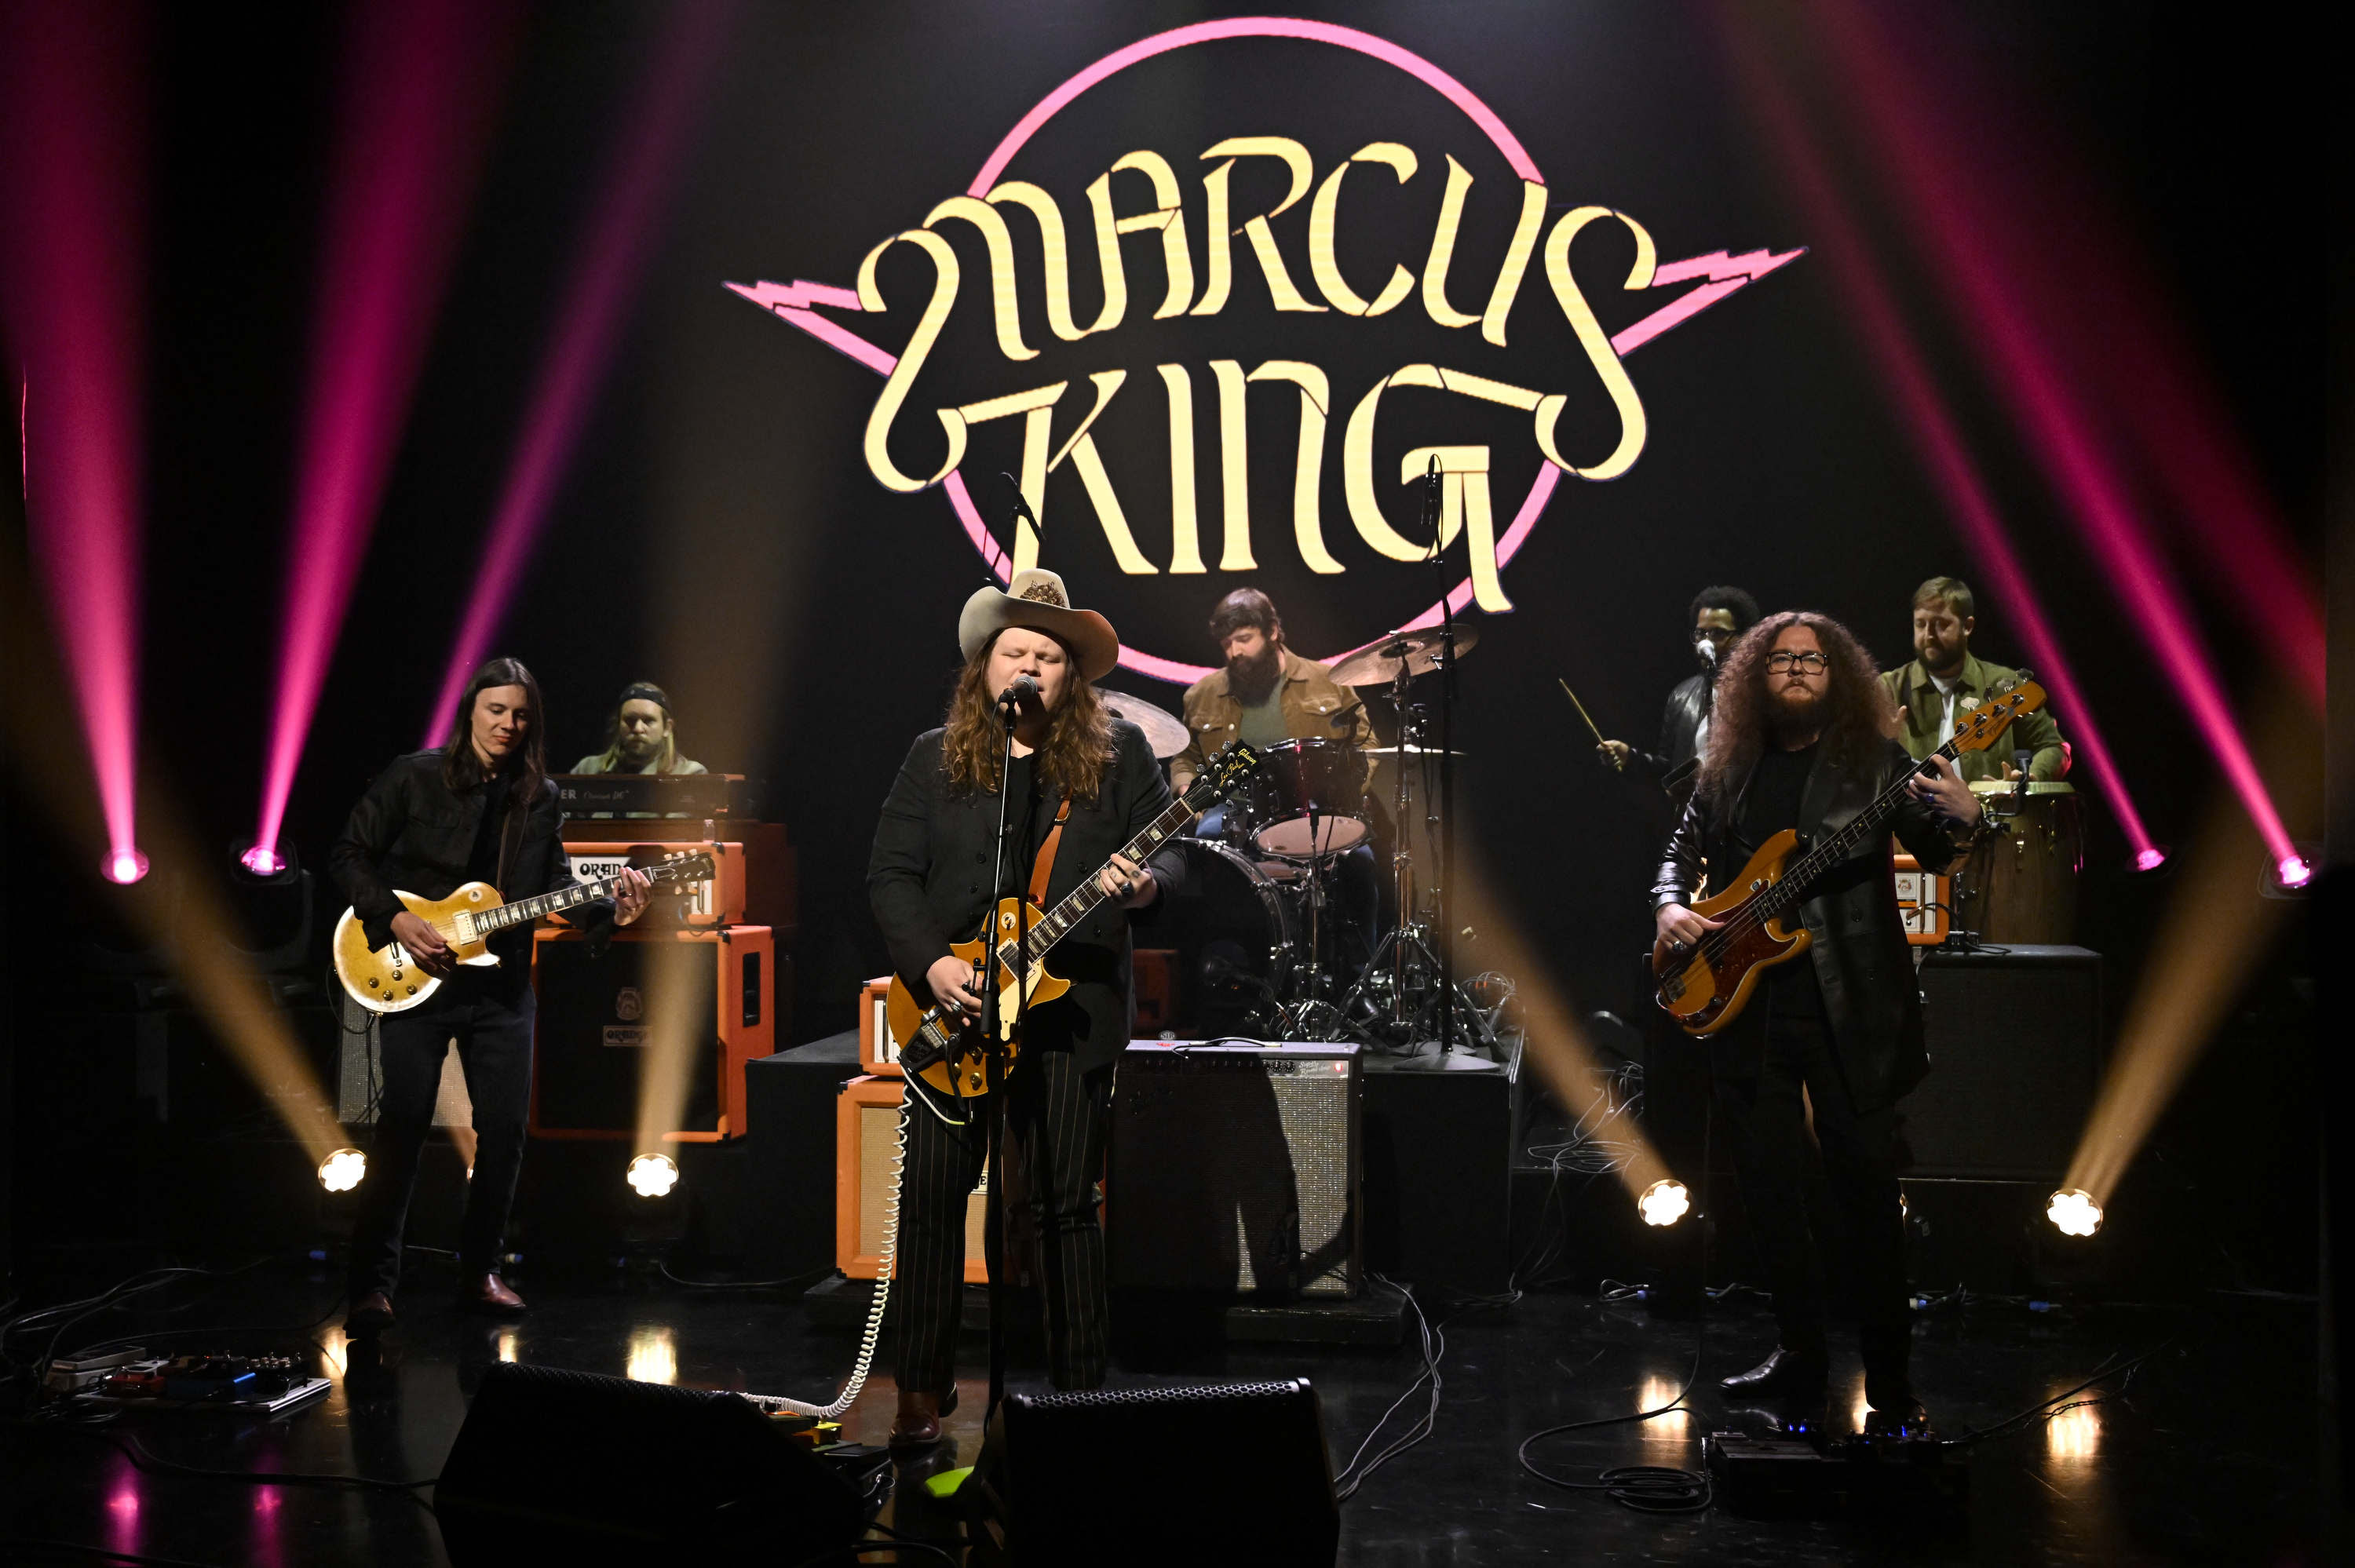 All hail to Marcus King and his electrifying performance of “Hard Working Man” on The Tonight Show